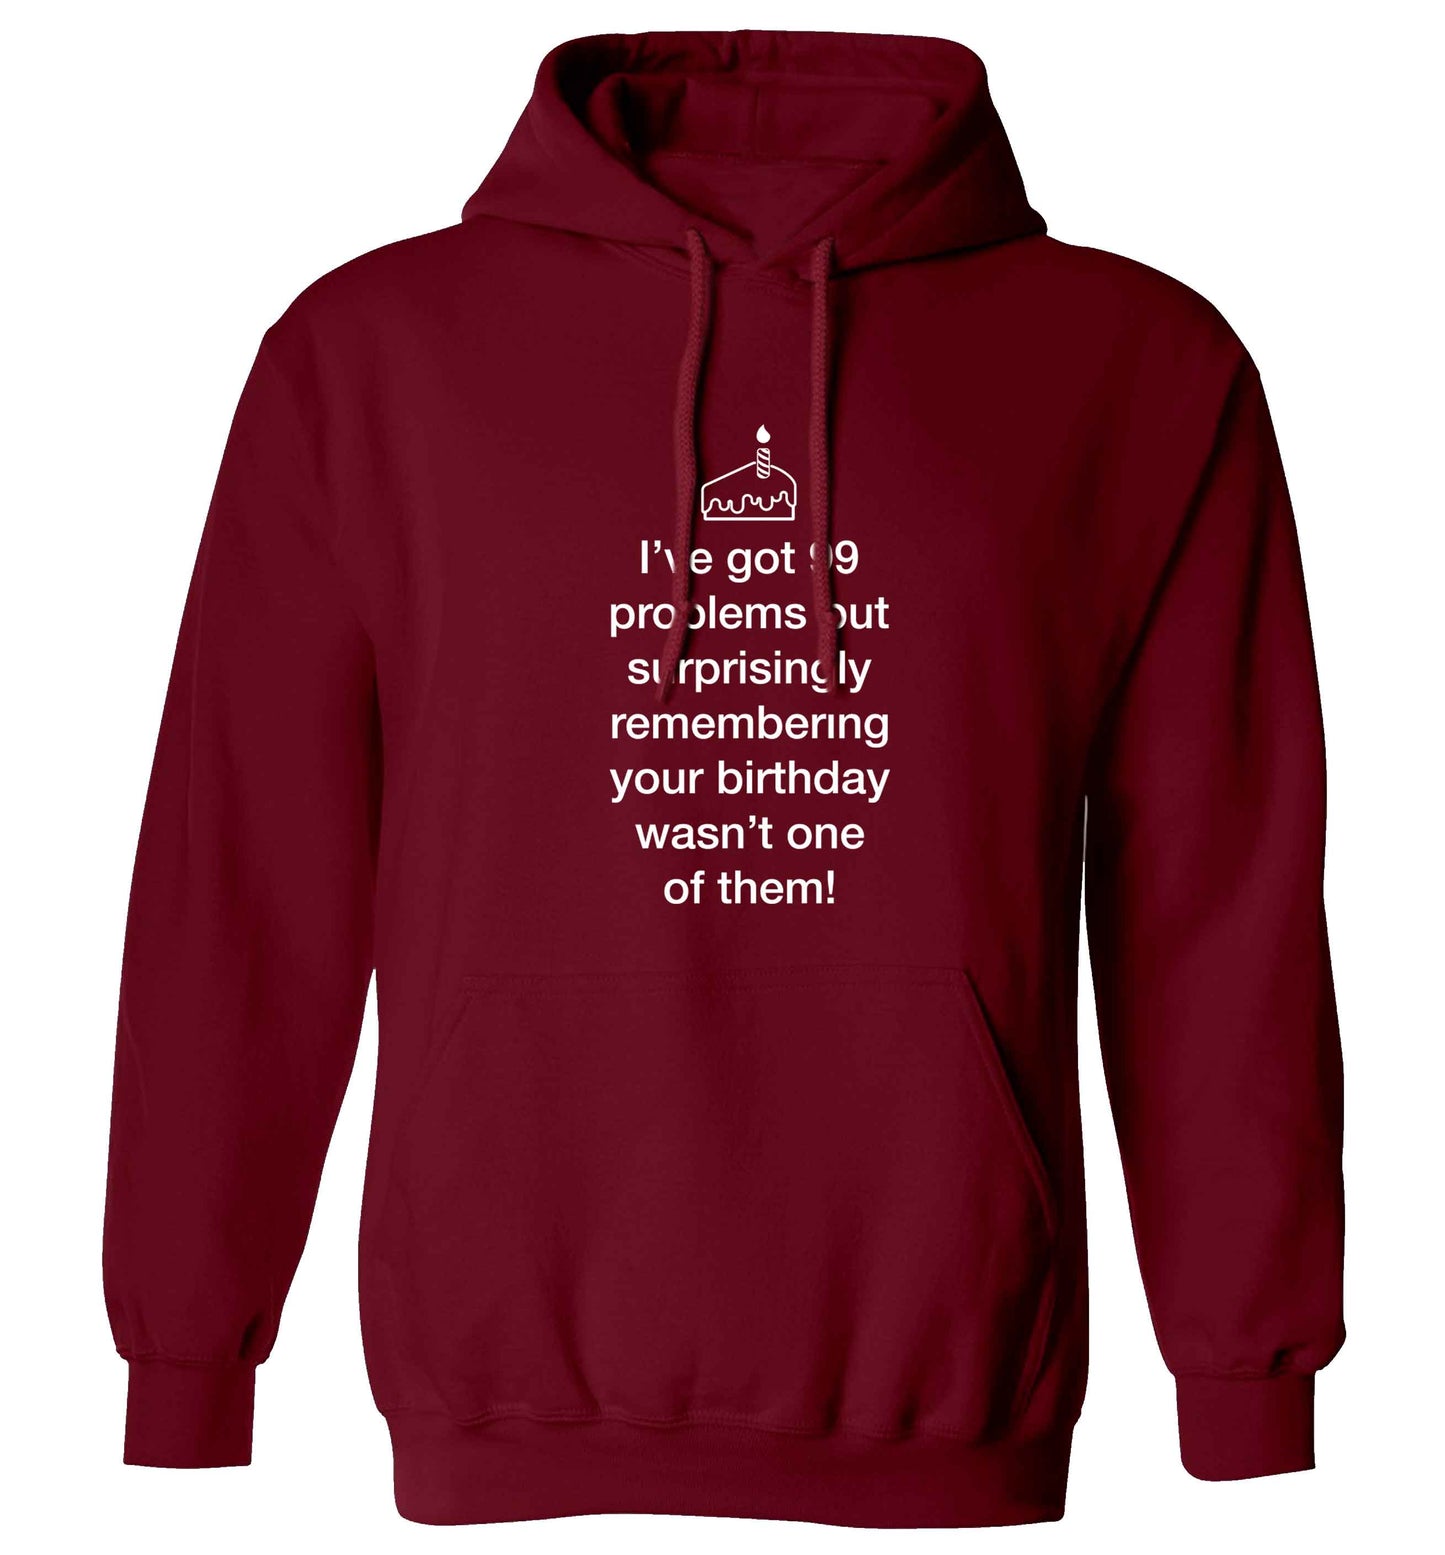 I've got 99 problems but surprisingly remembering your birthday wasn't one of them! adults unisex maroon hoodie 2XL